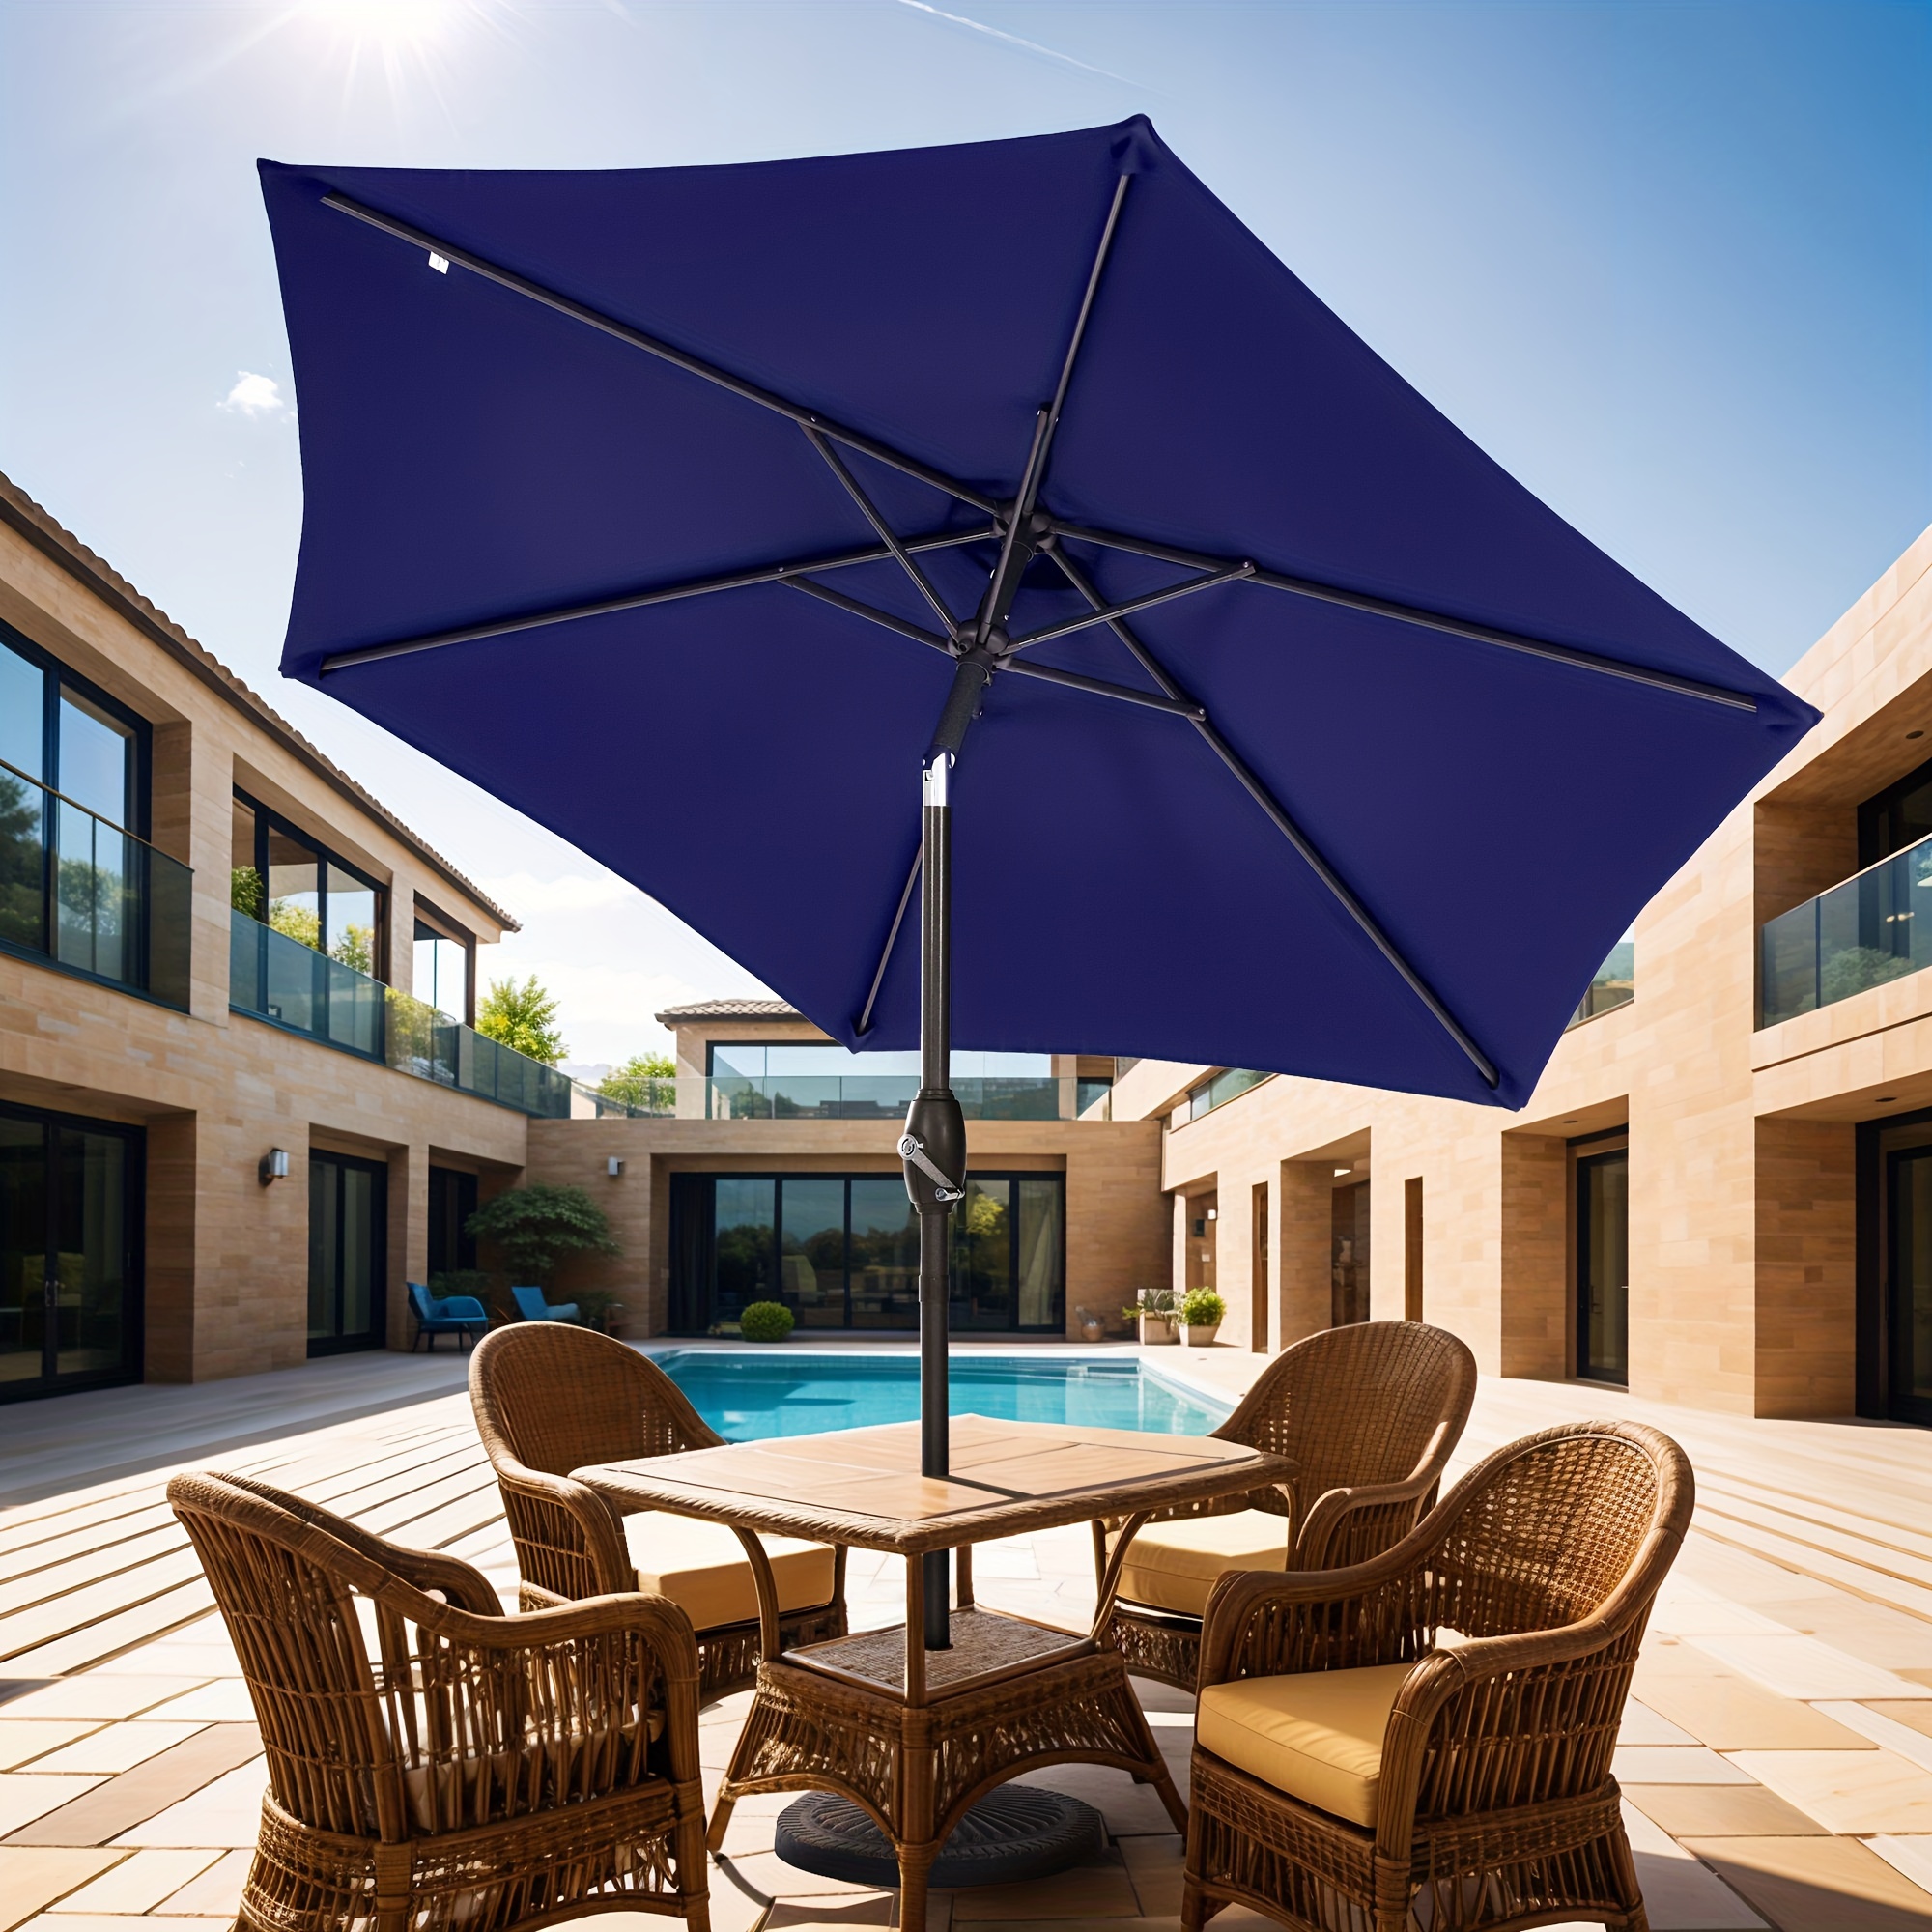 

7.5ft Pato Market Umbrellas And Shade, Table Umbrella With Tilt Button For Deck, Garden And Pool